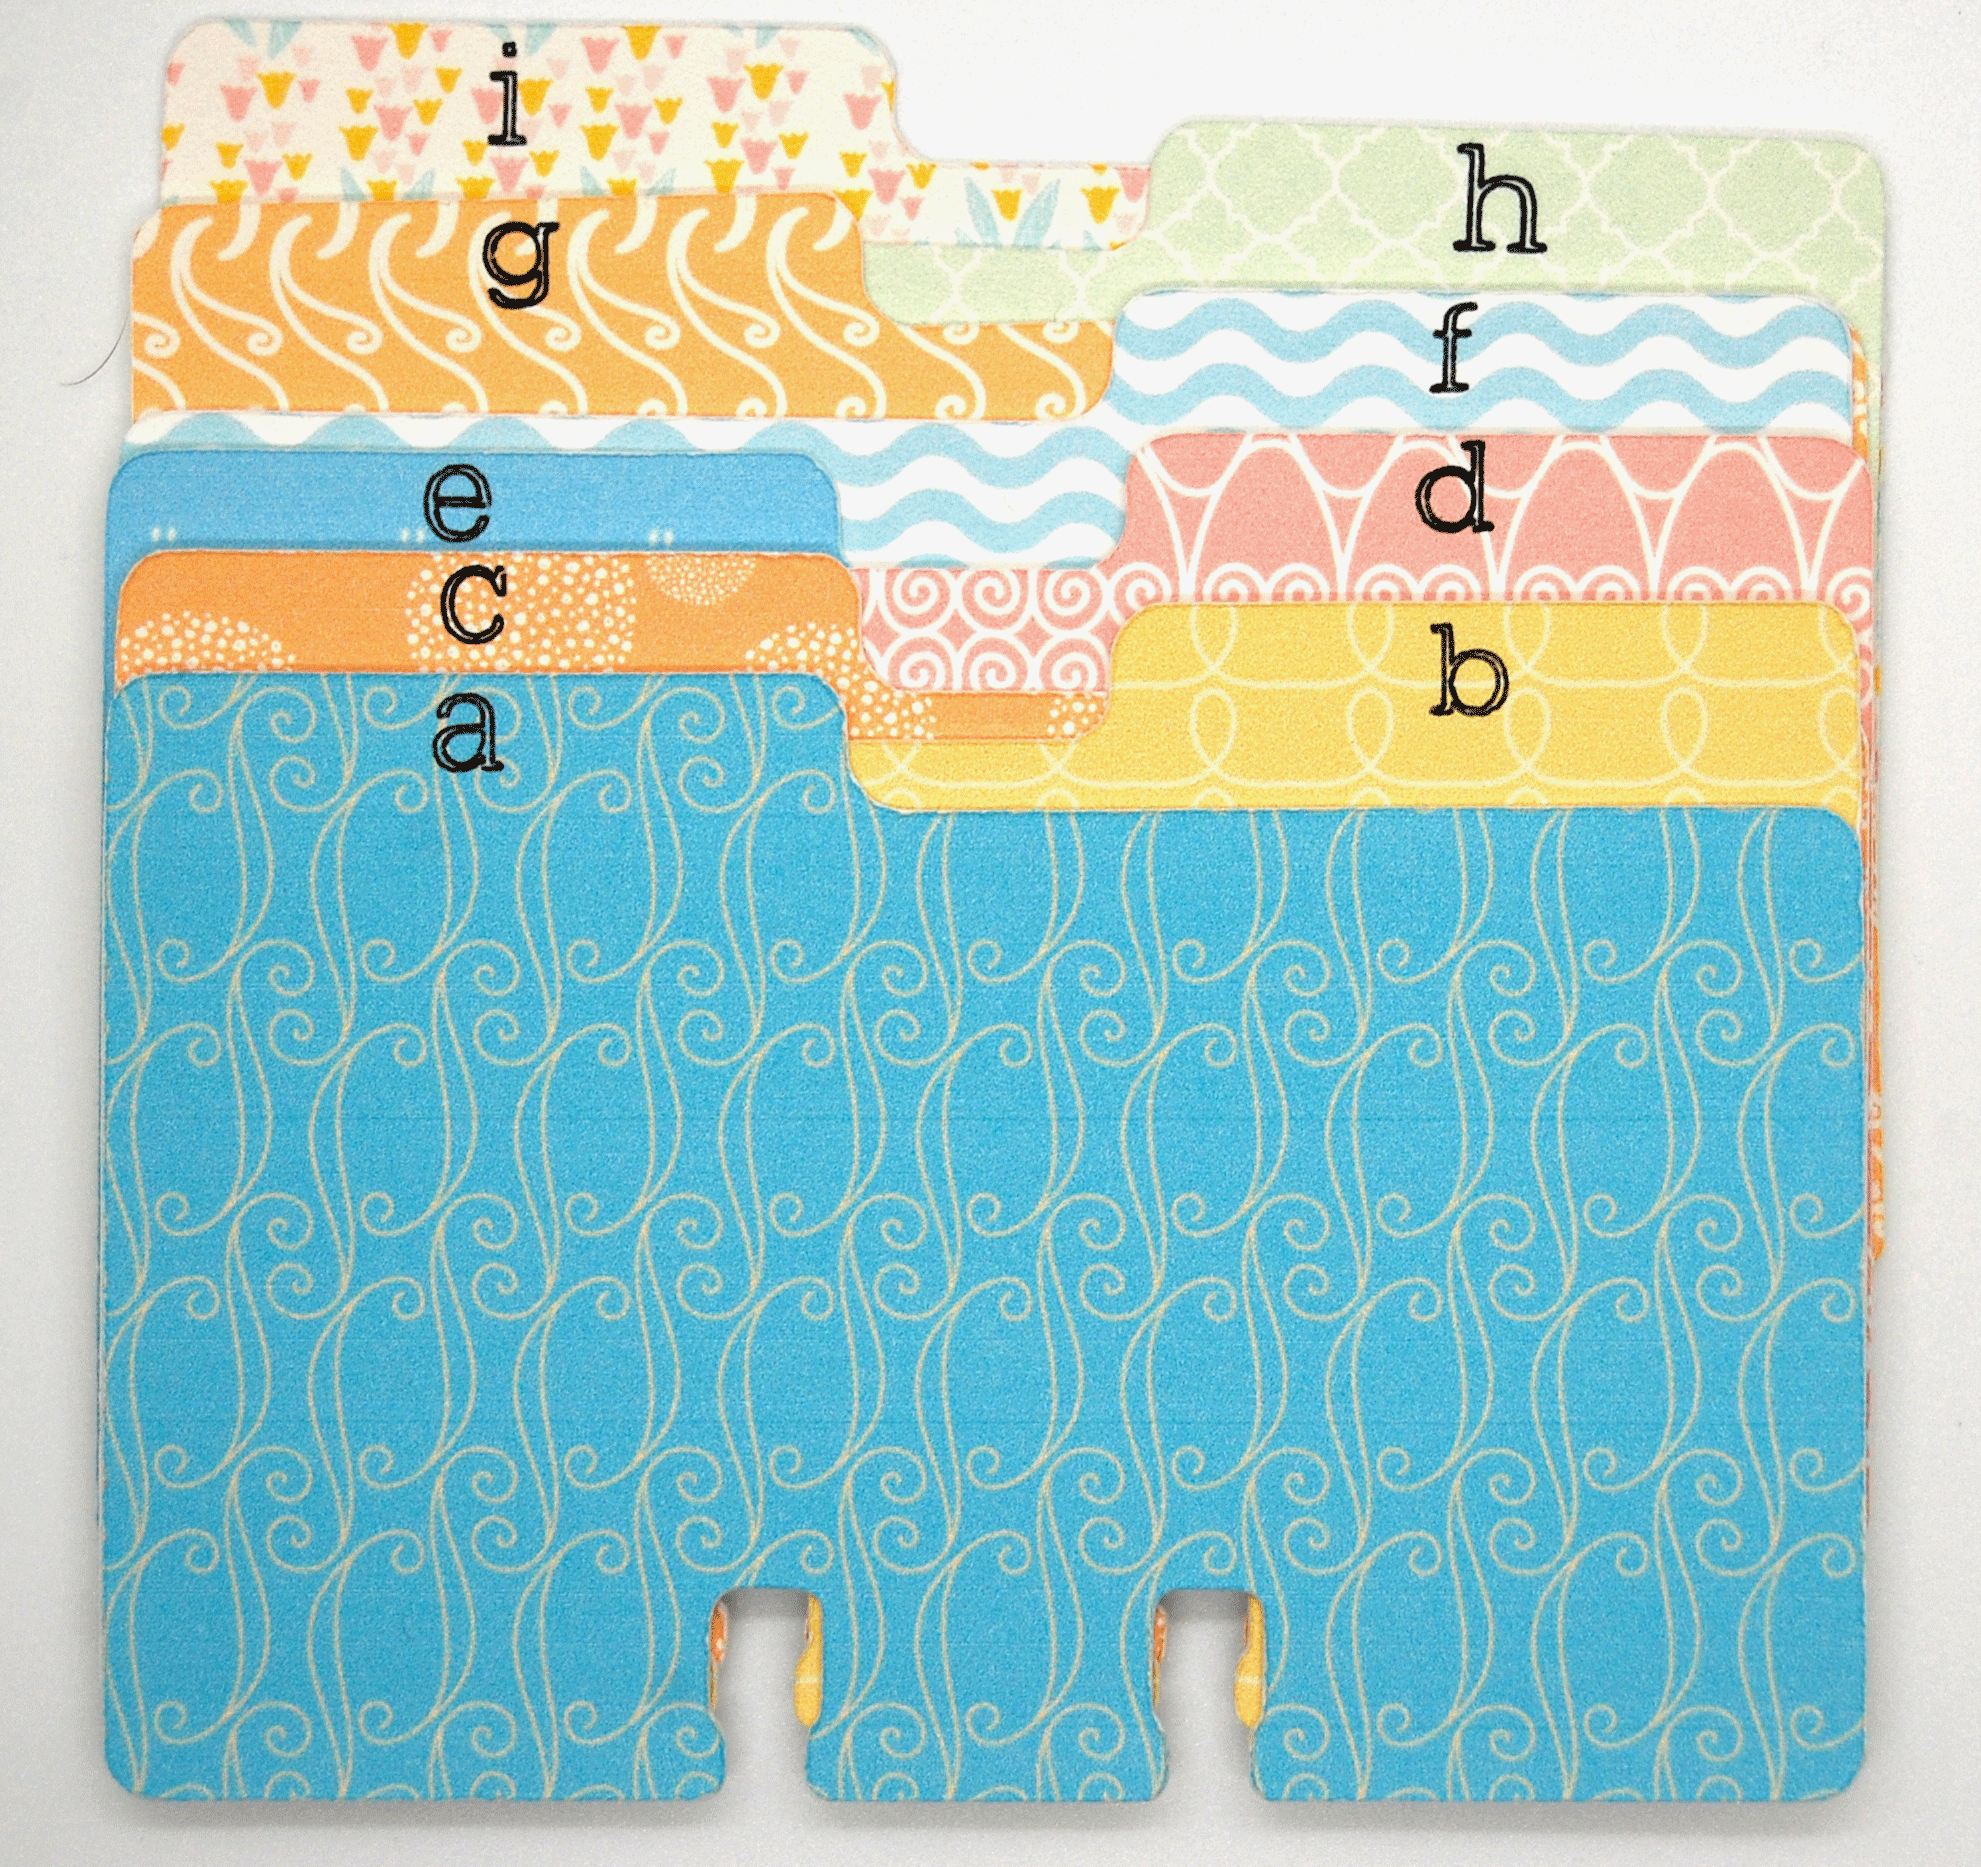 Pretty colored Rolodex dividers in many pastel patterns.  Each divider has a lower case letter from a to i. 